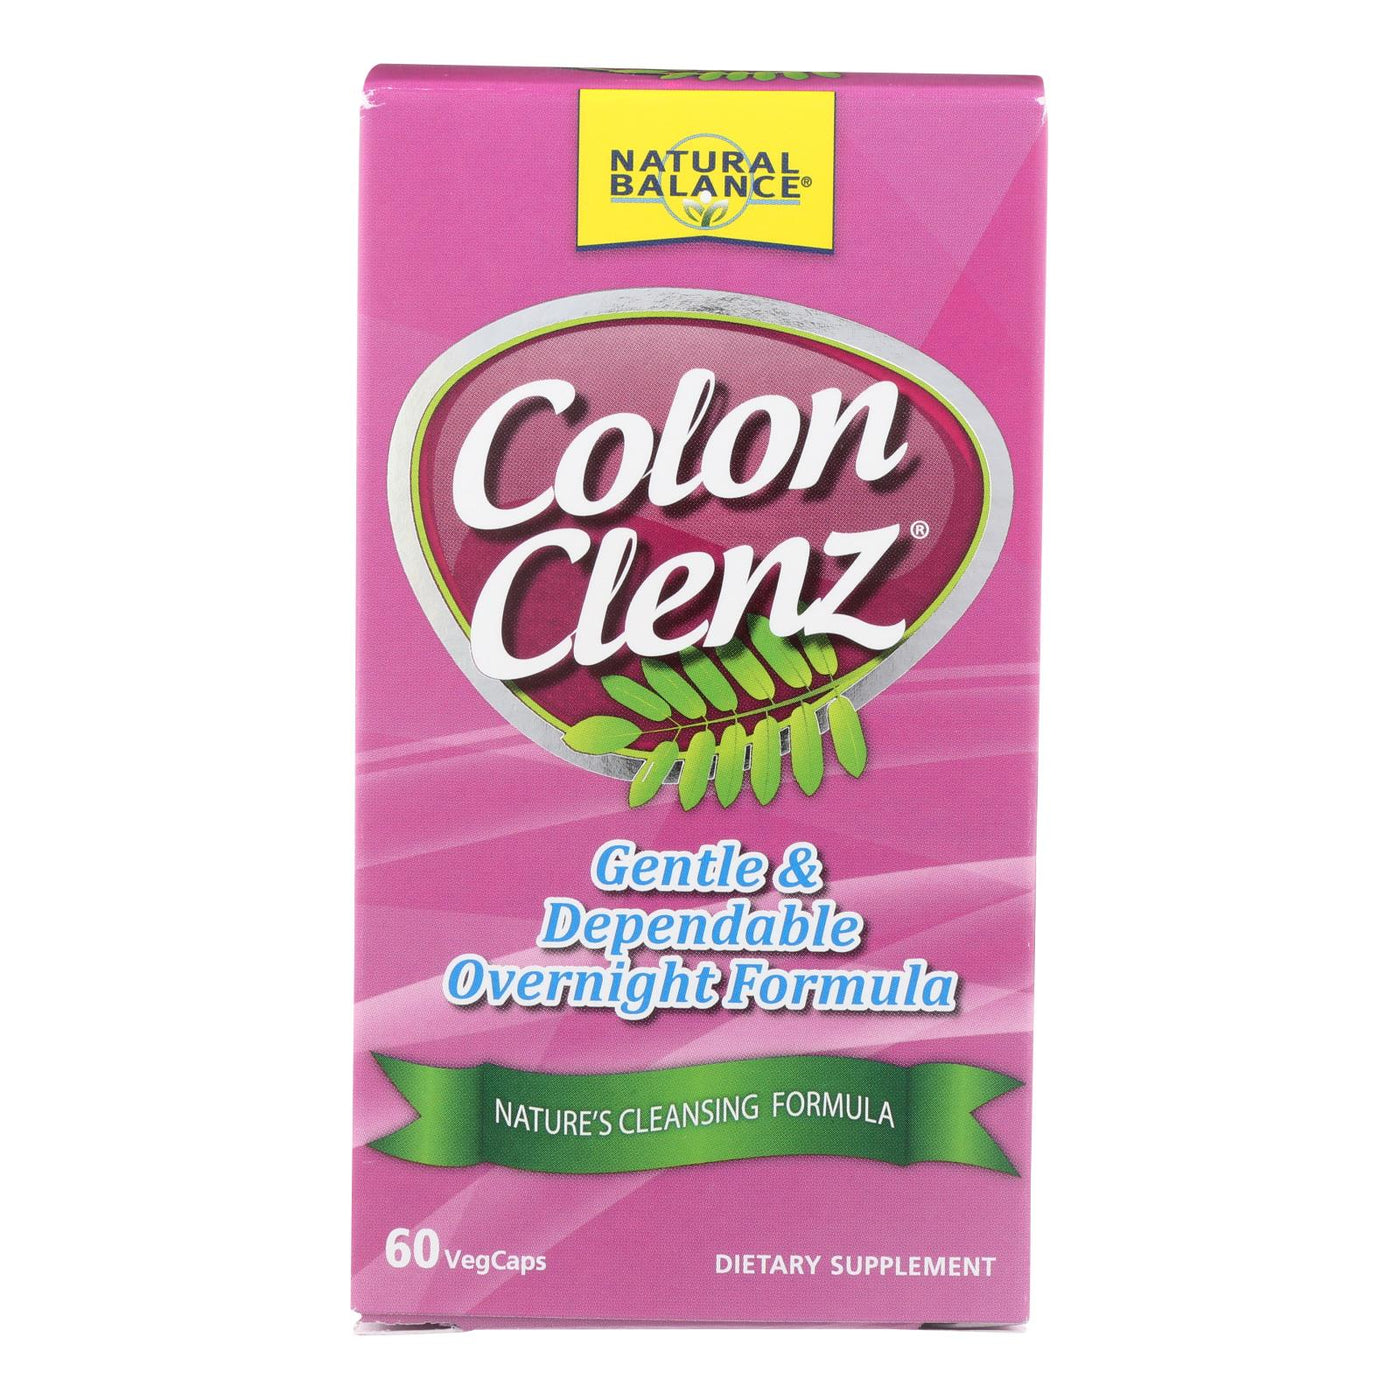 Natural Balance Colon Clenz - 60 Vegetable Capsules | OnlyNaturals.us